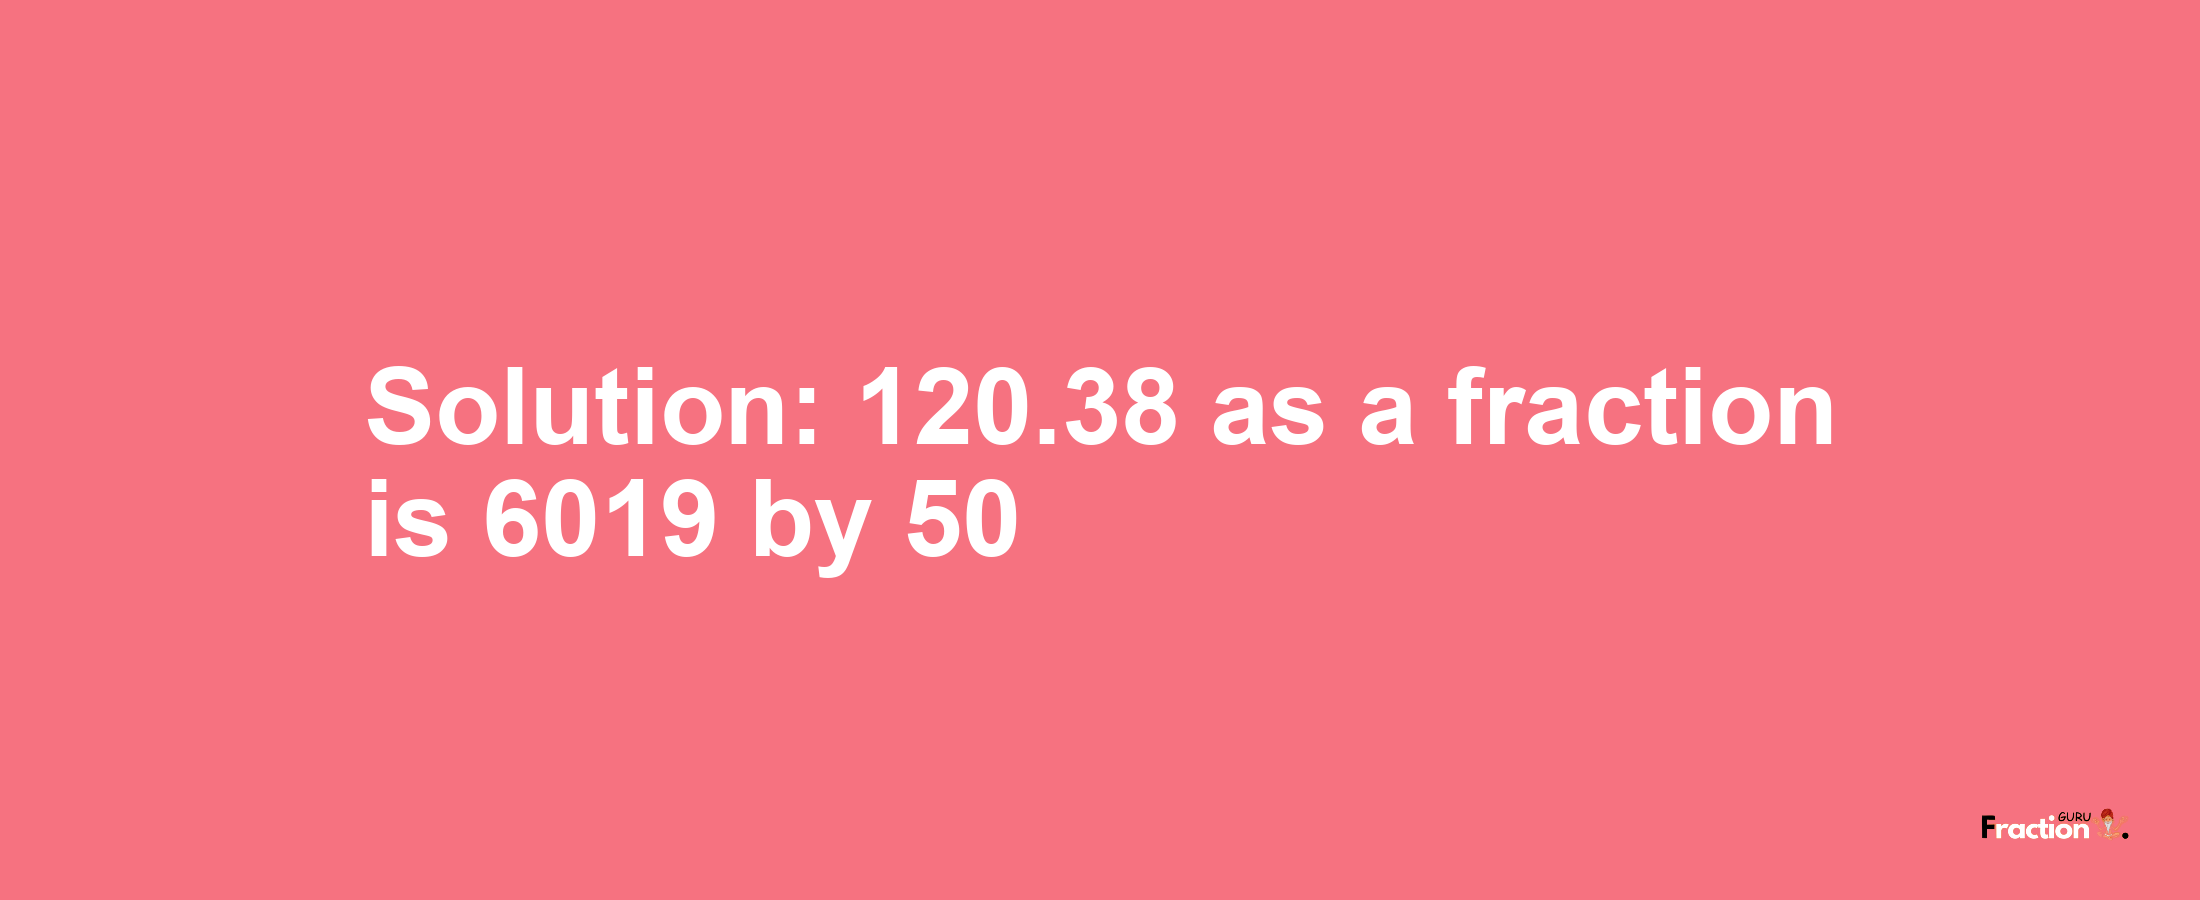 Solution:120.38 as a fraction is 6019/50